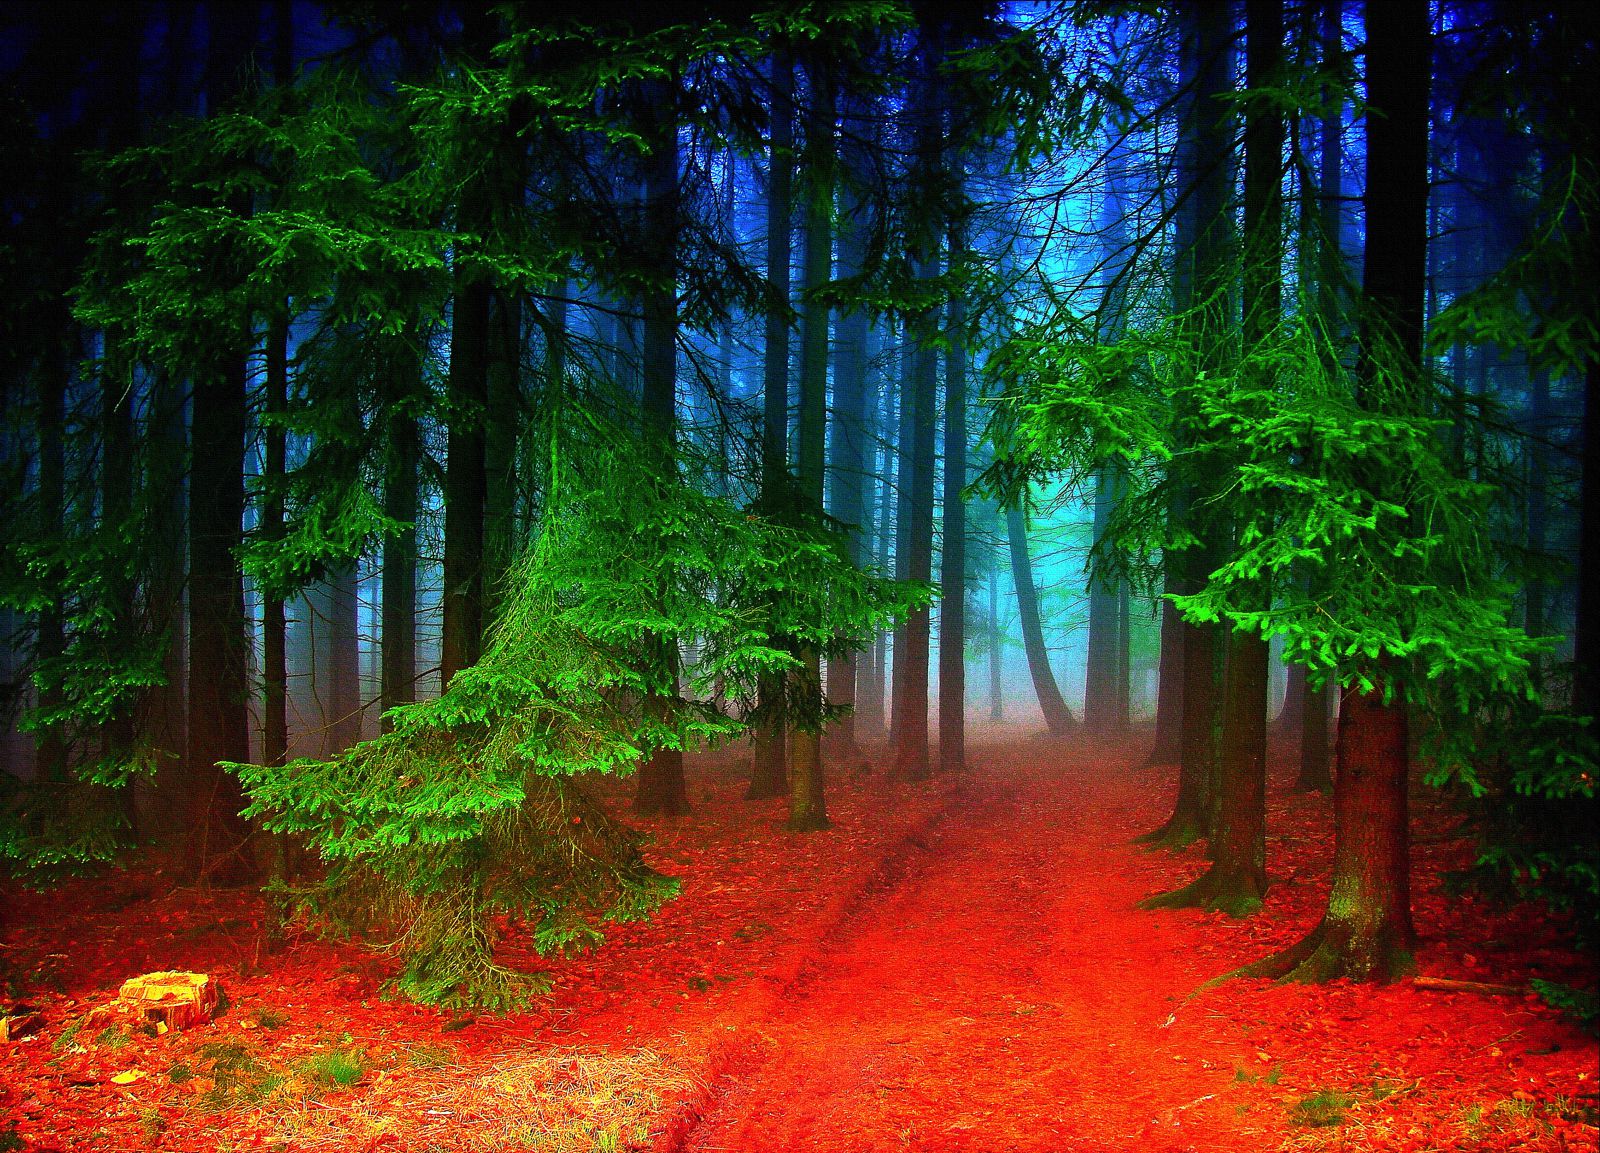 Magical Photos That Will Make You Want To Visit The Black Forest